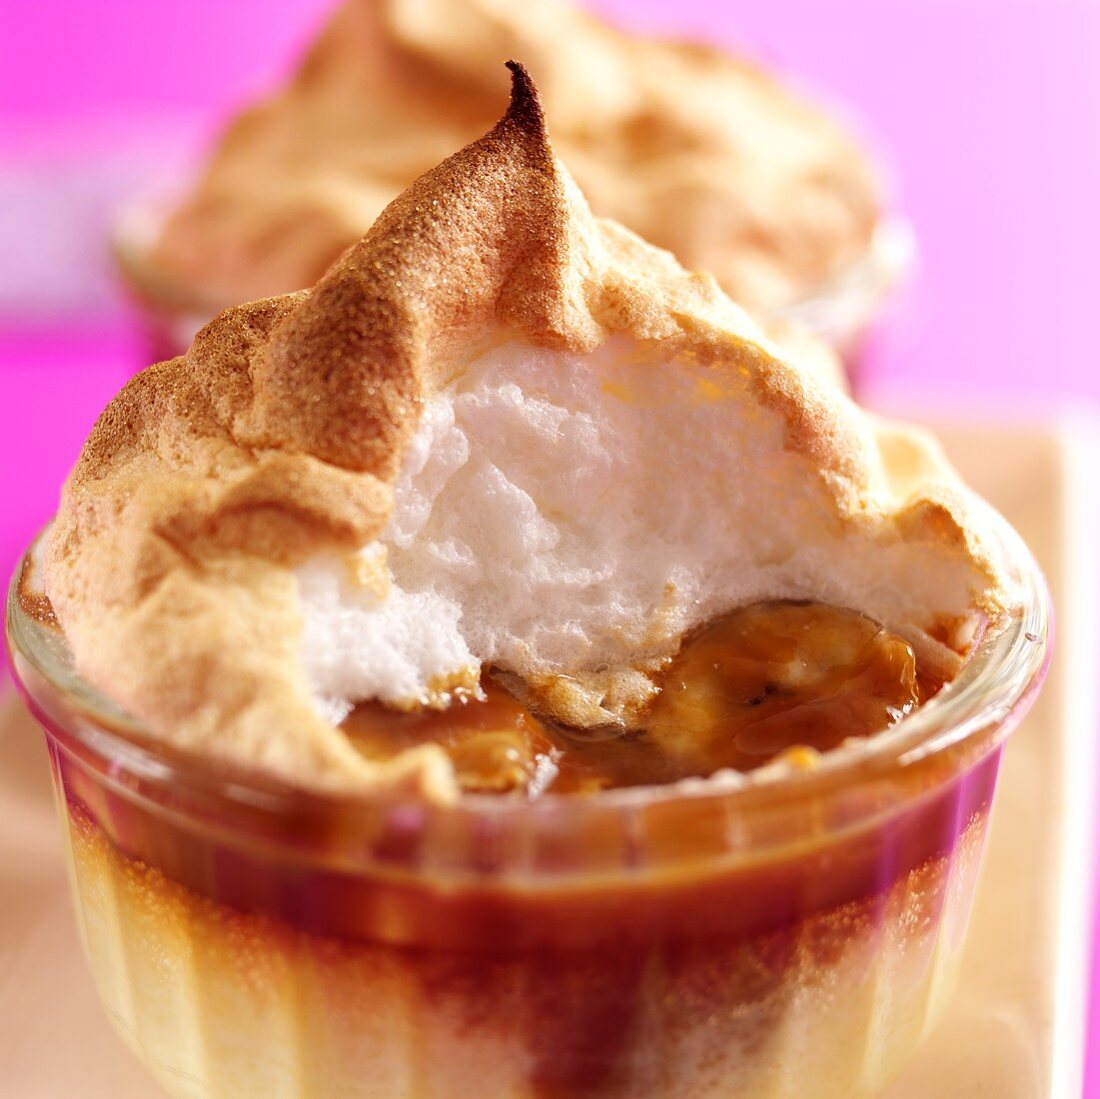 Queen of puddings with meringue topping